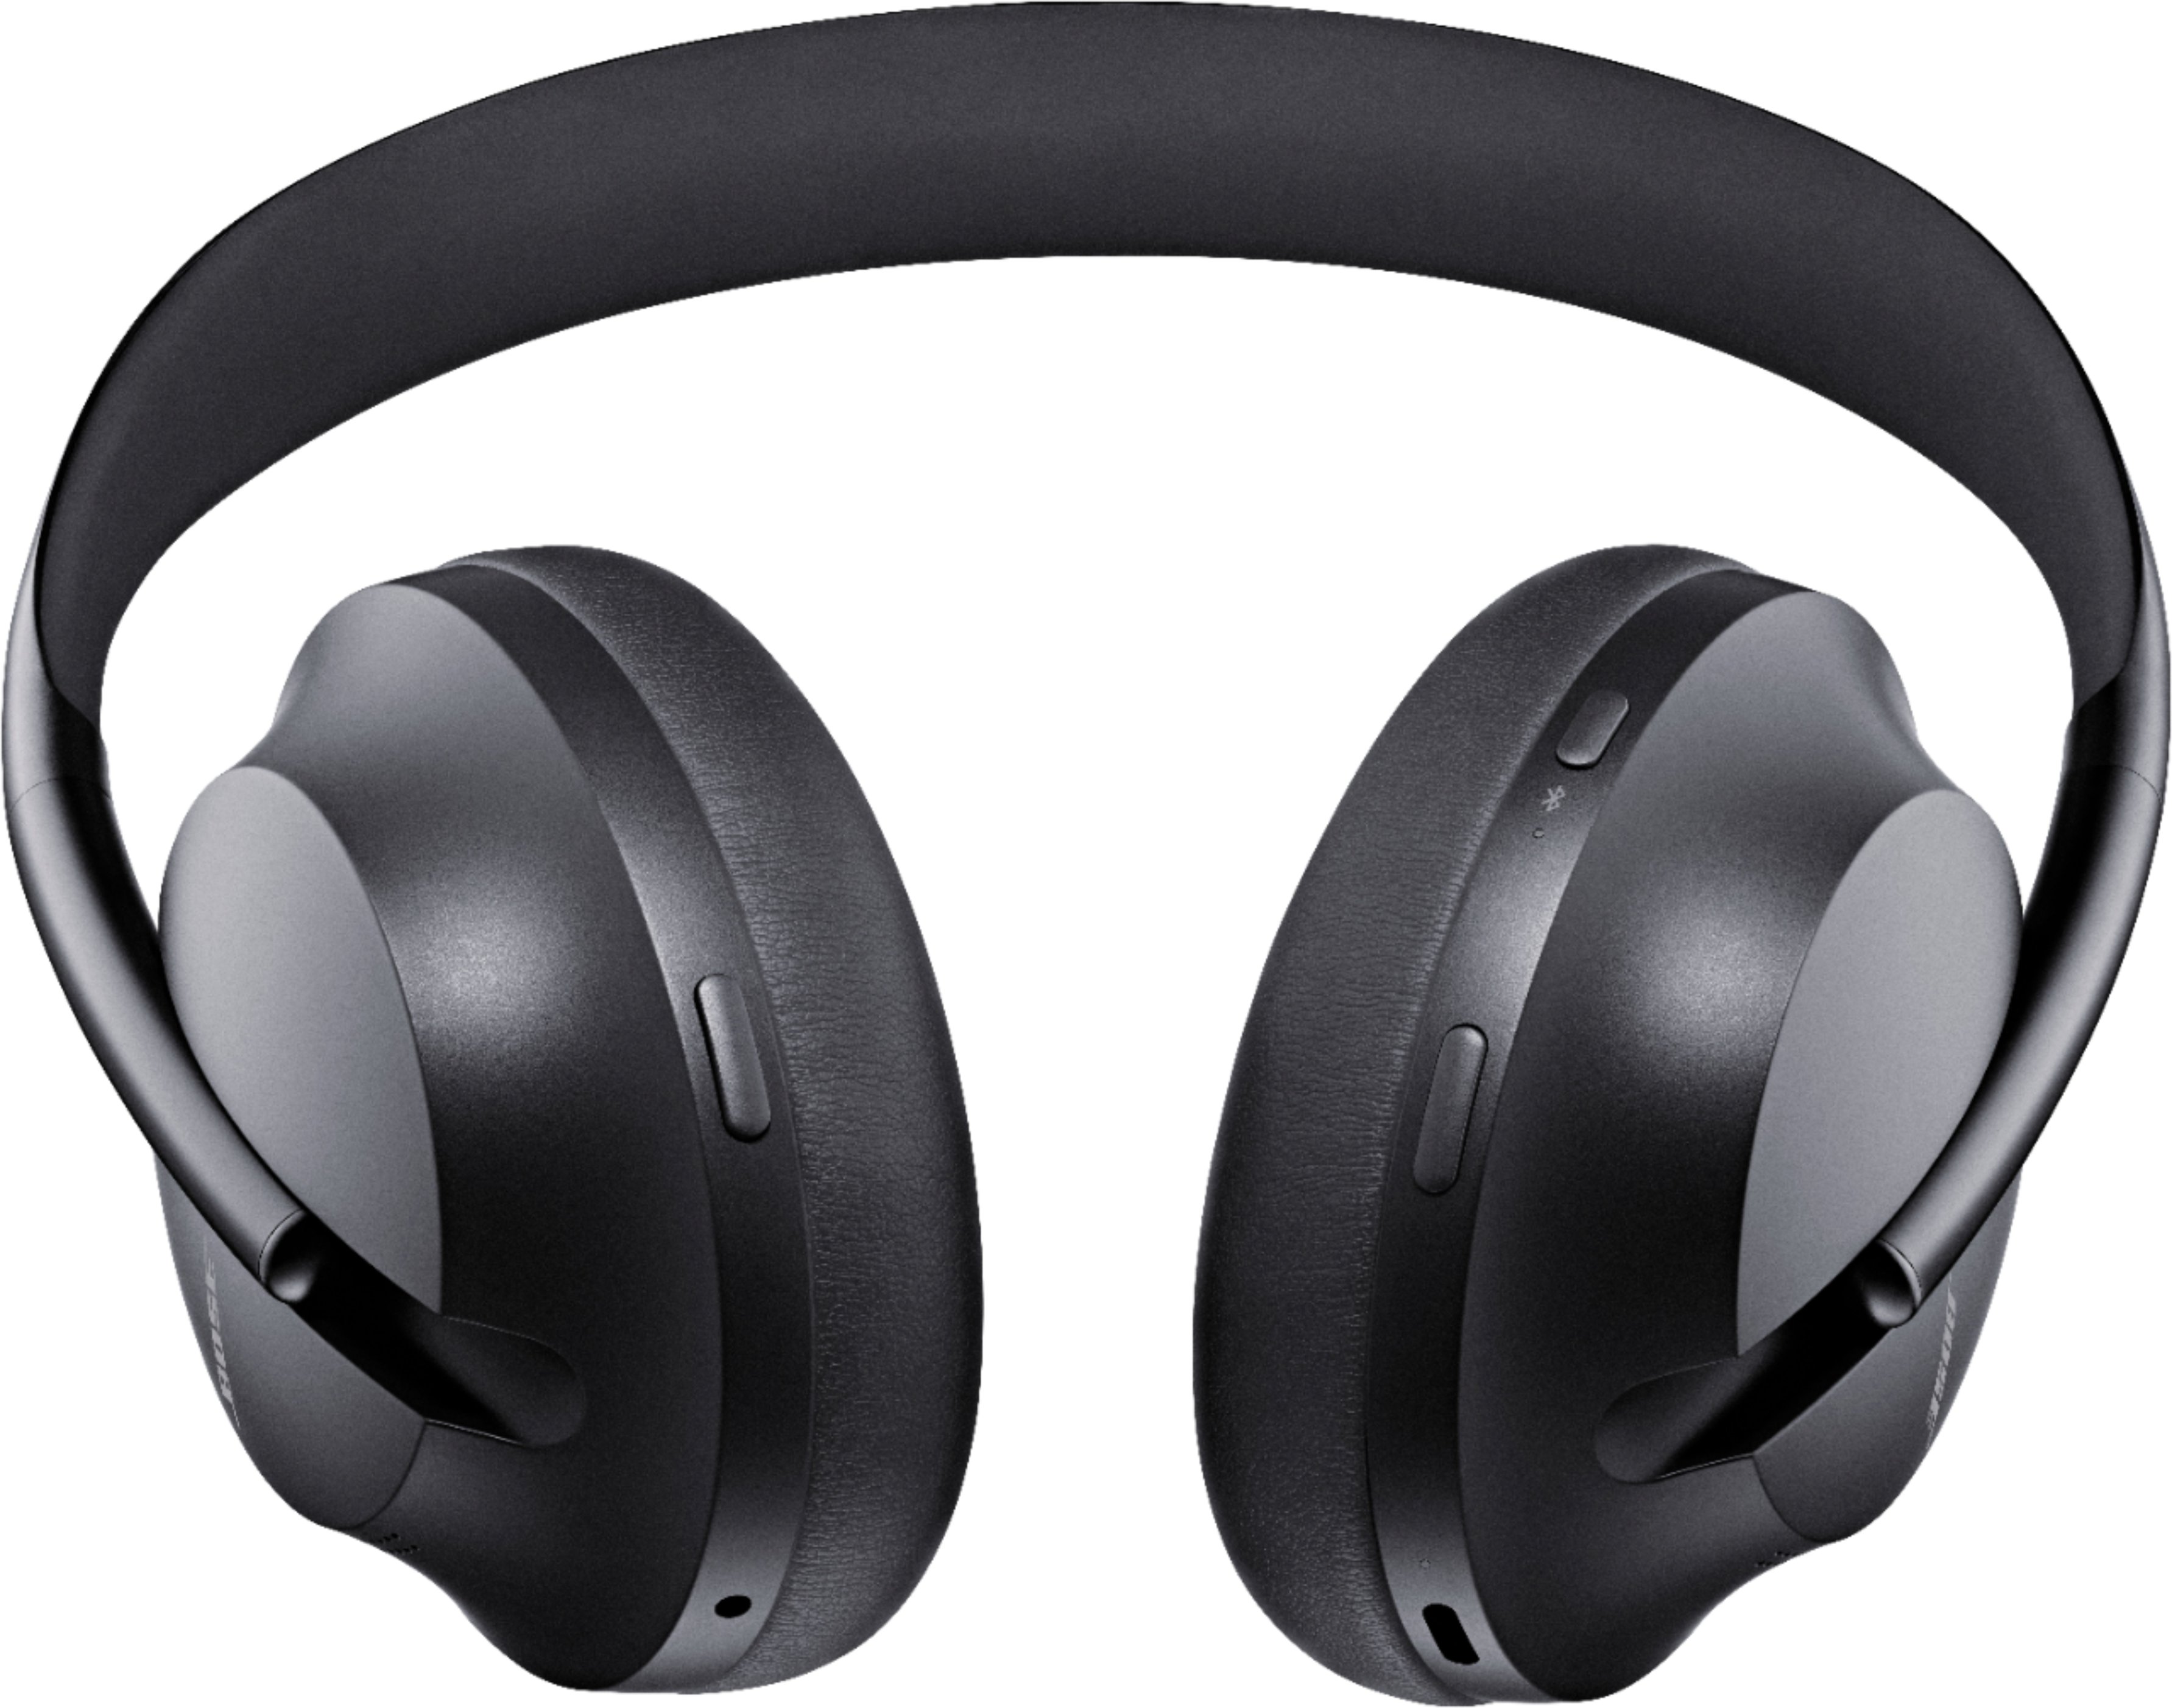 Angle View: Bose - Headphones 700 Wireless Noise Cancelling Over-the-Ear Headphones - Triple Black